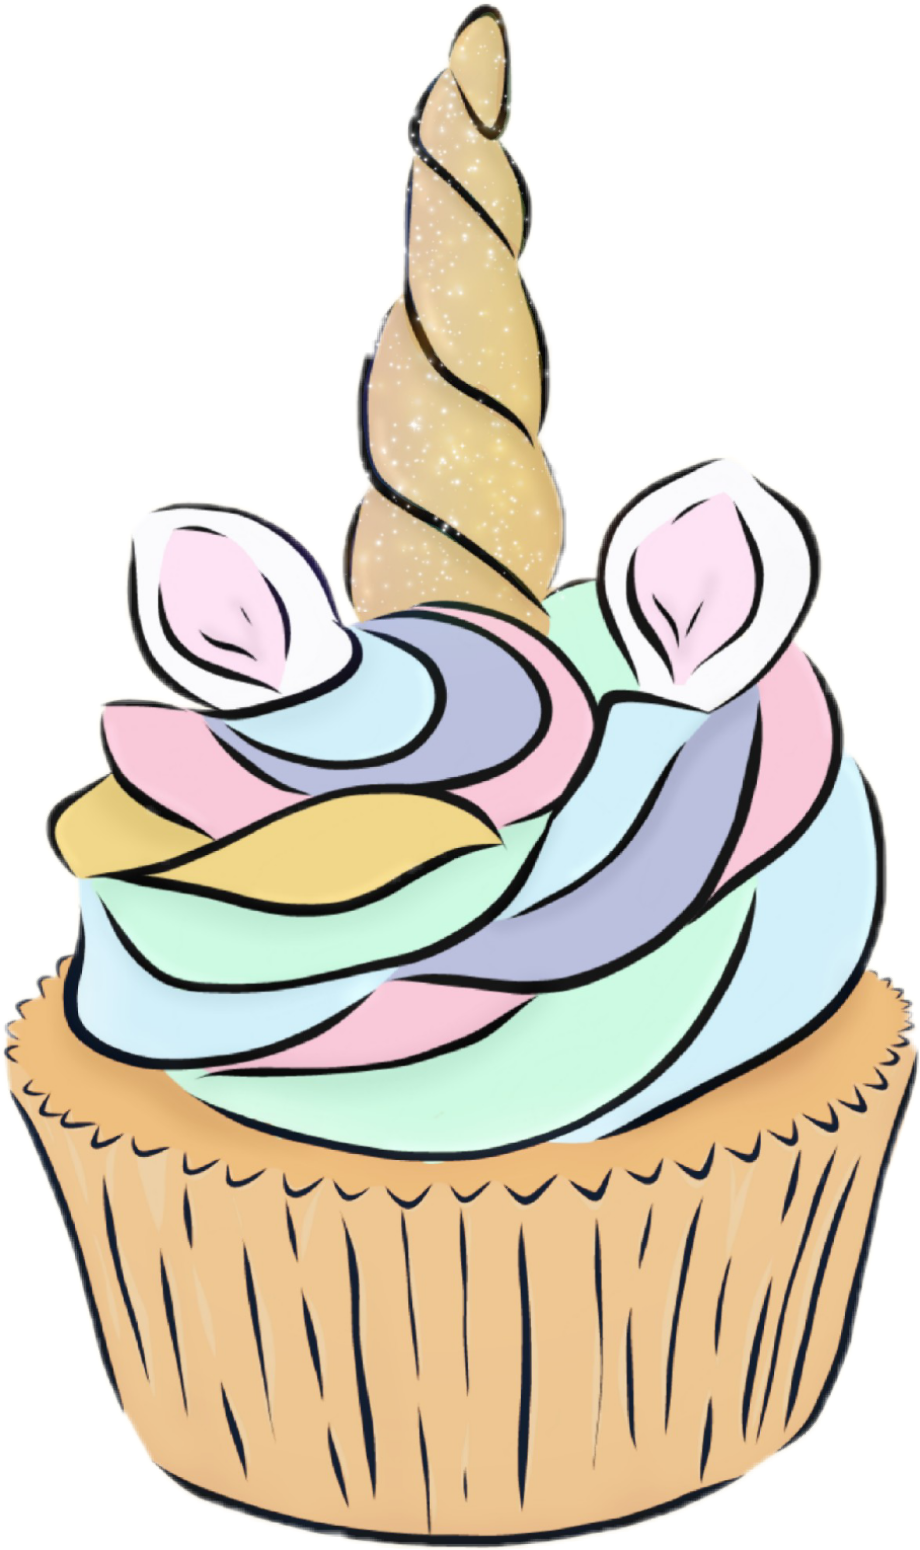 Download High Quality cupcake clipart unicorn Transparent PNG Images ...